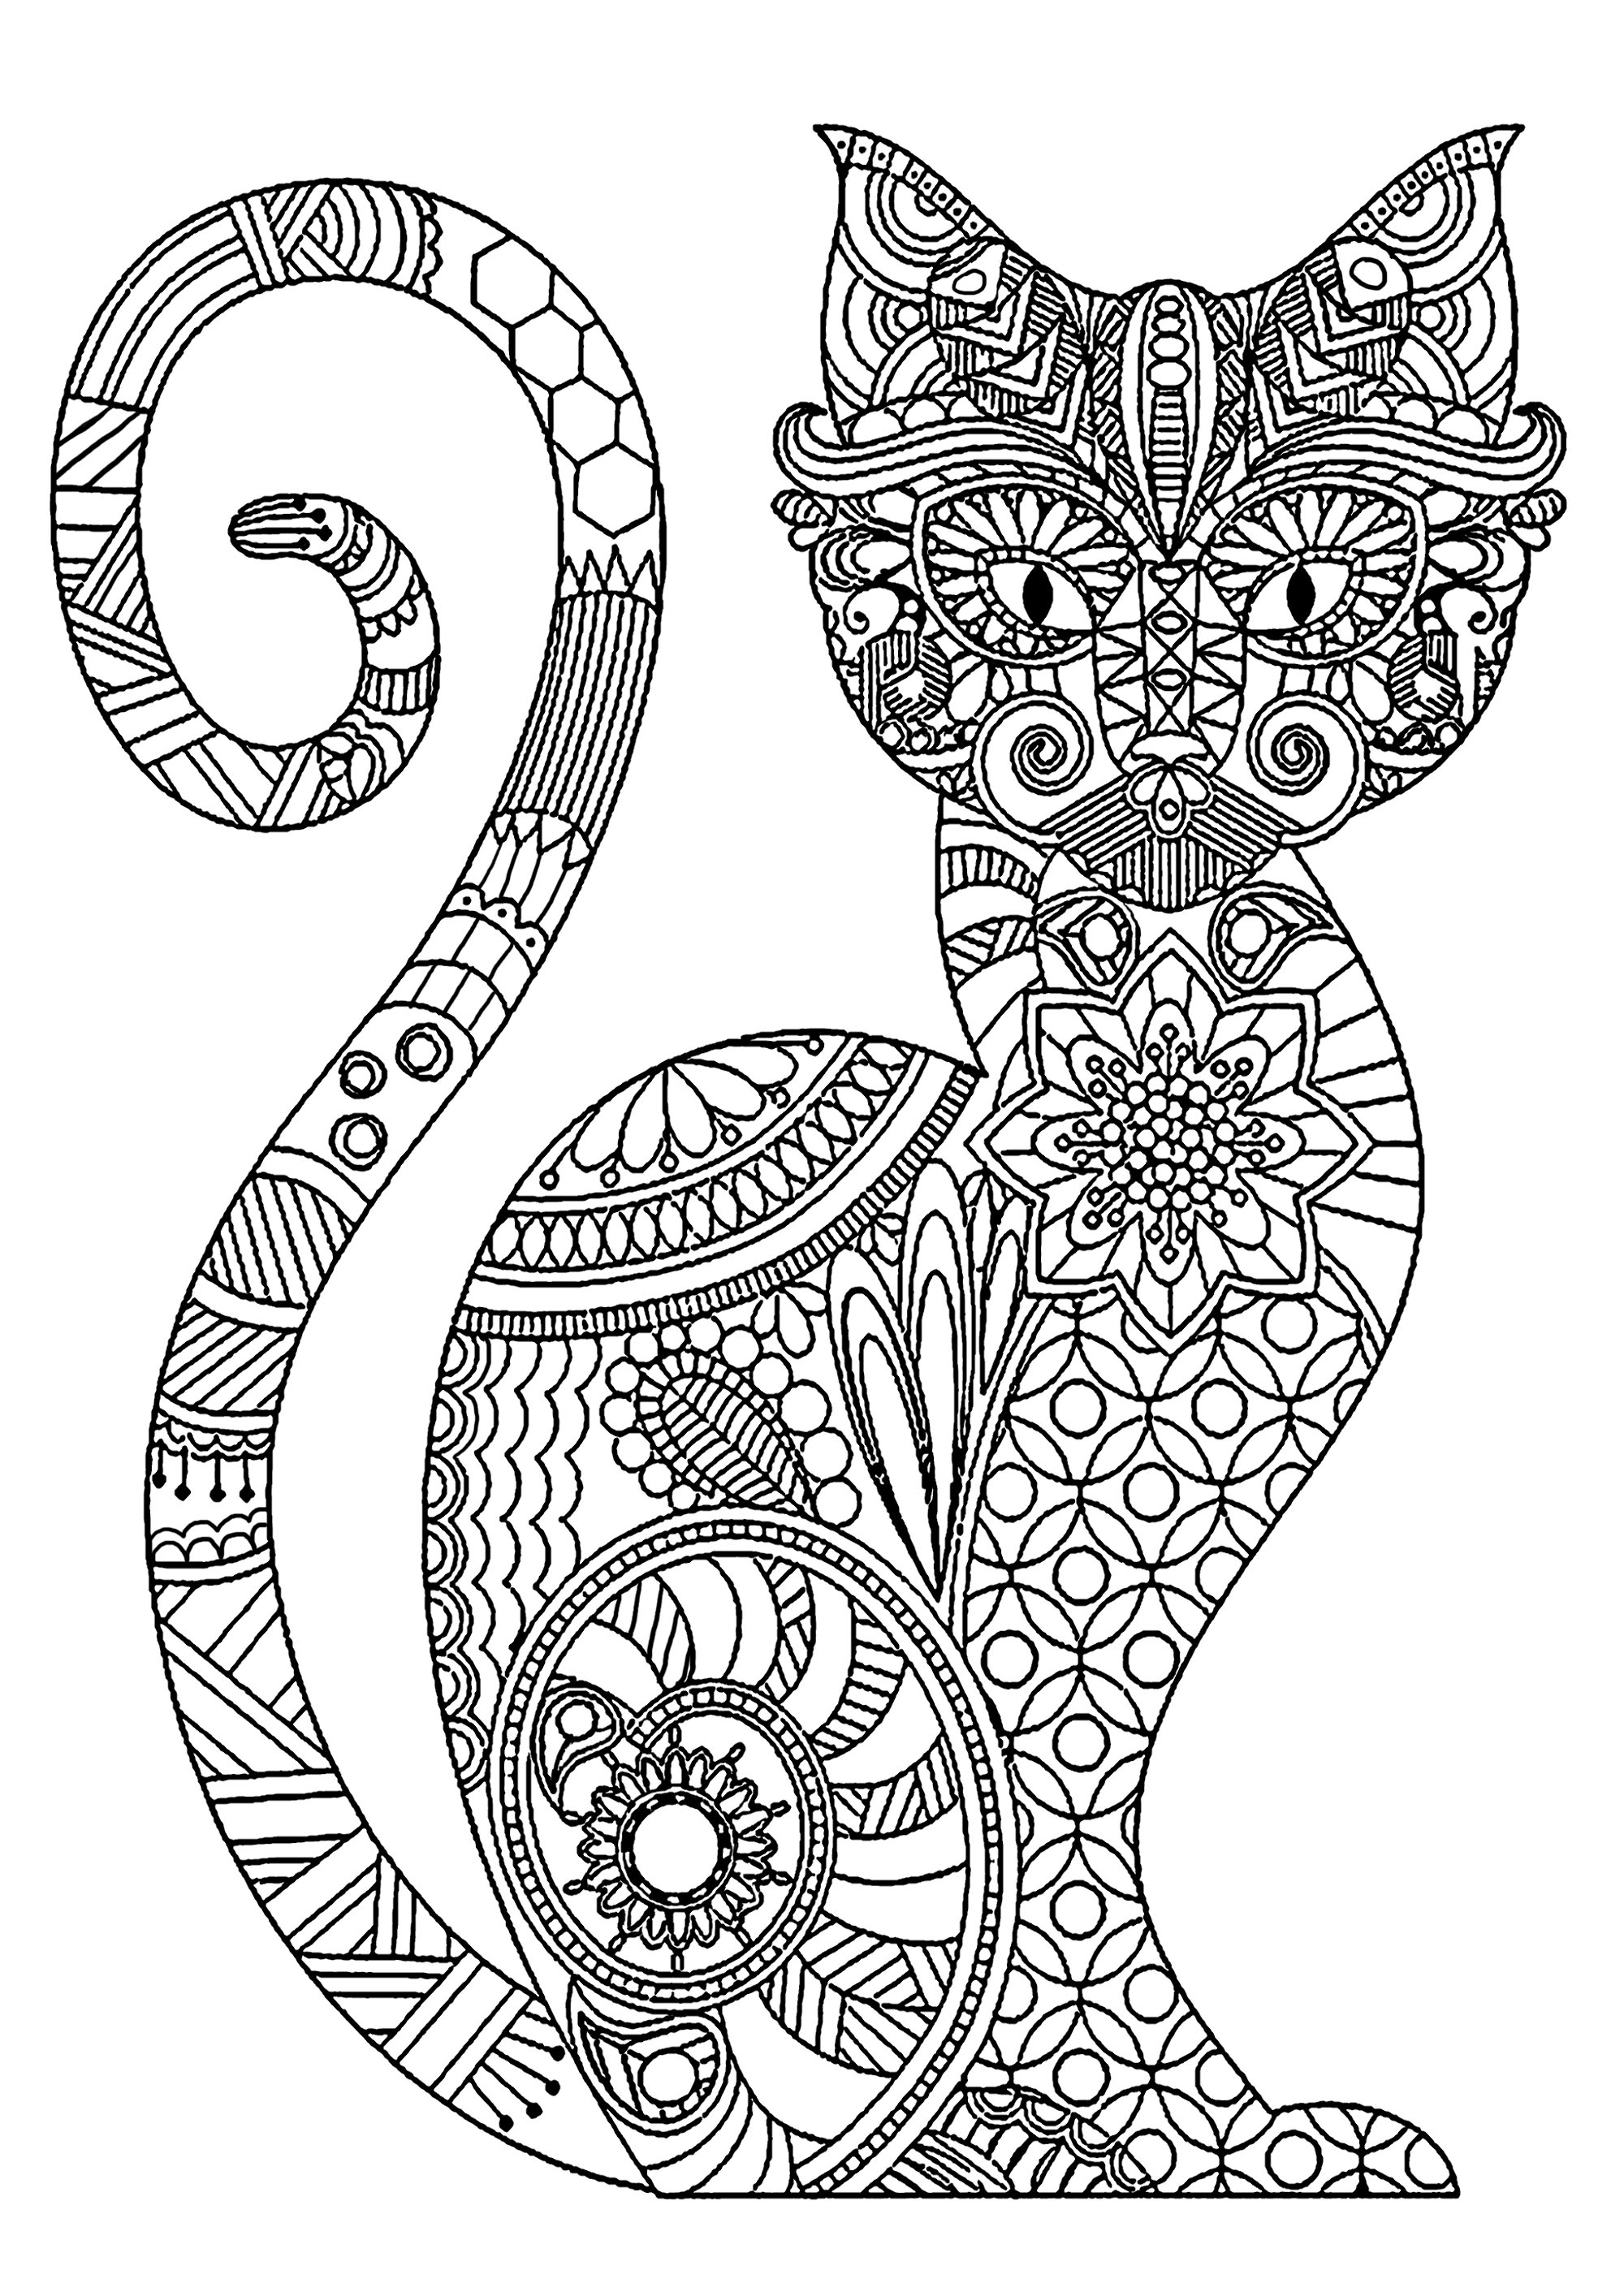 Hard Realistic Cat Coloring Pages : Download it right now and enjoy the ...